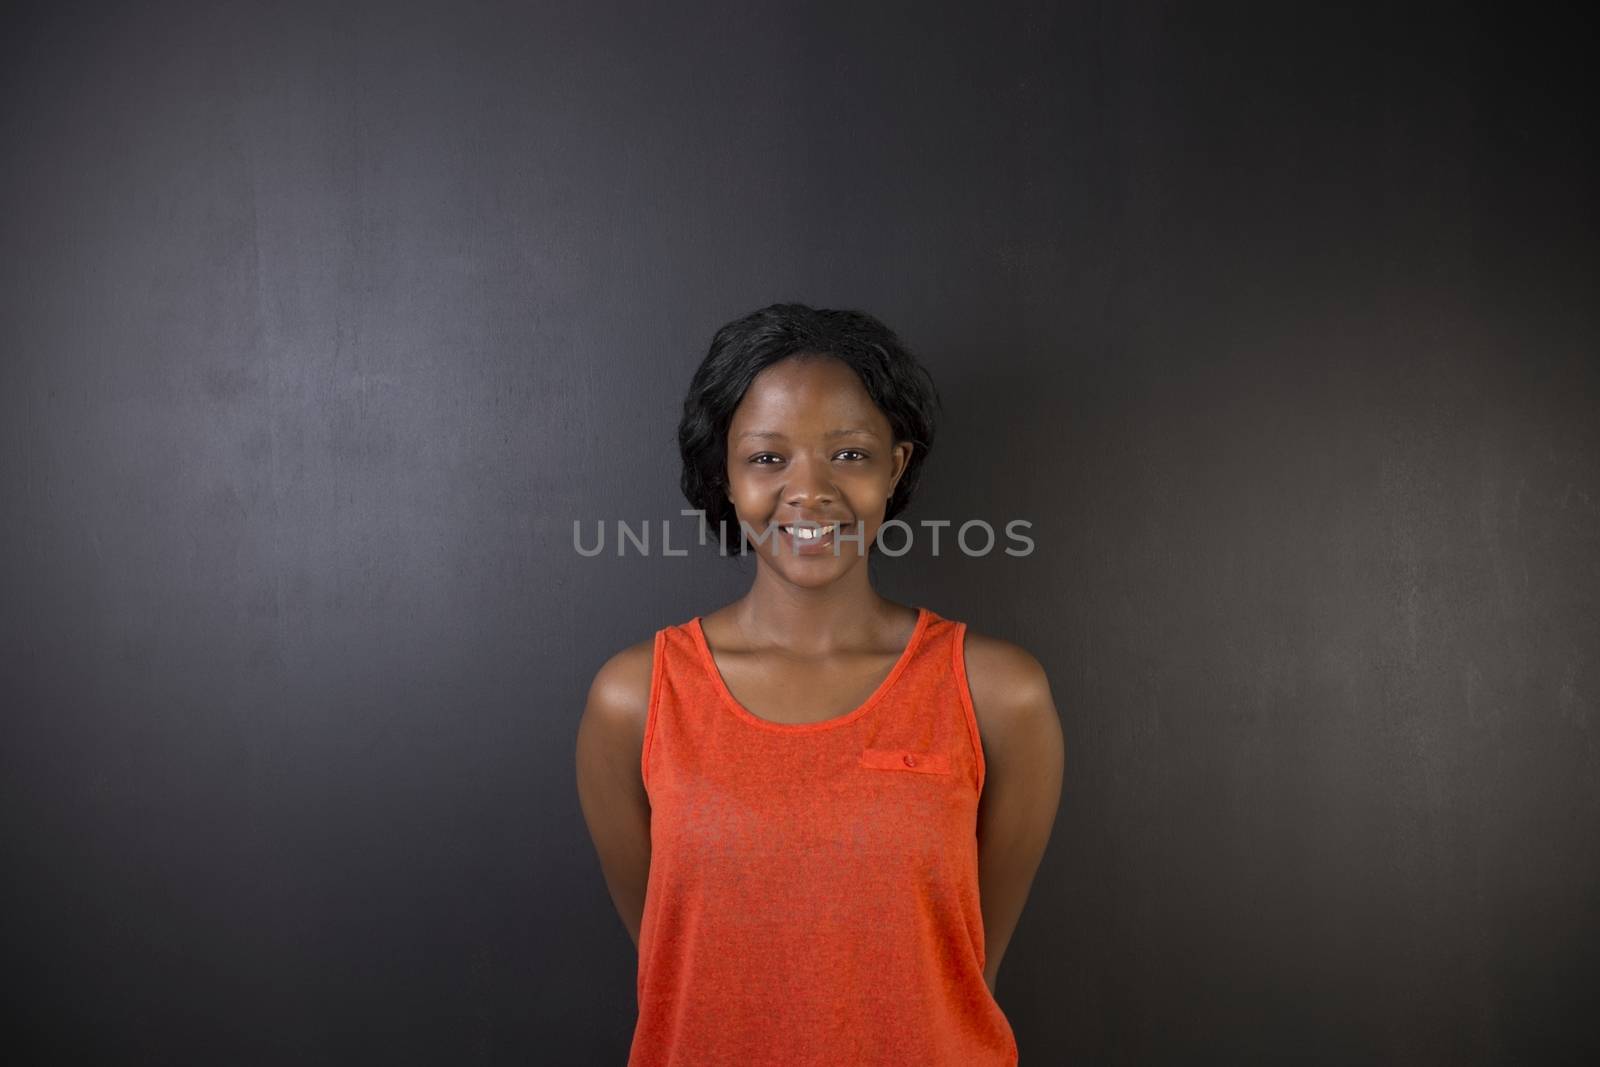 South African or African American woman teacher or student against a dark blackboard background by alistaircotton